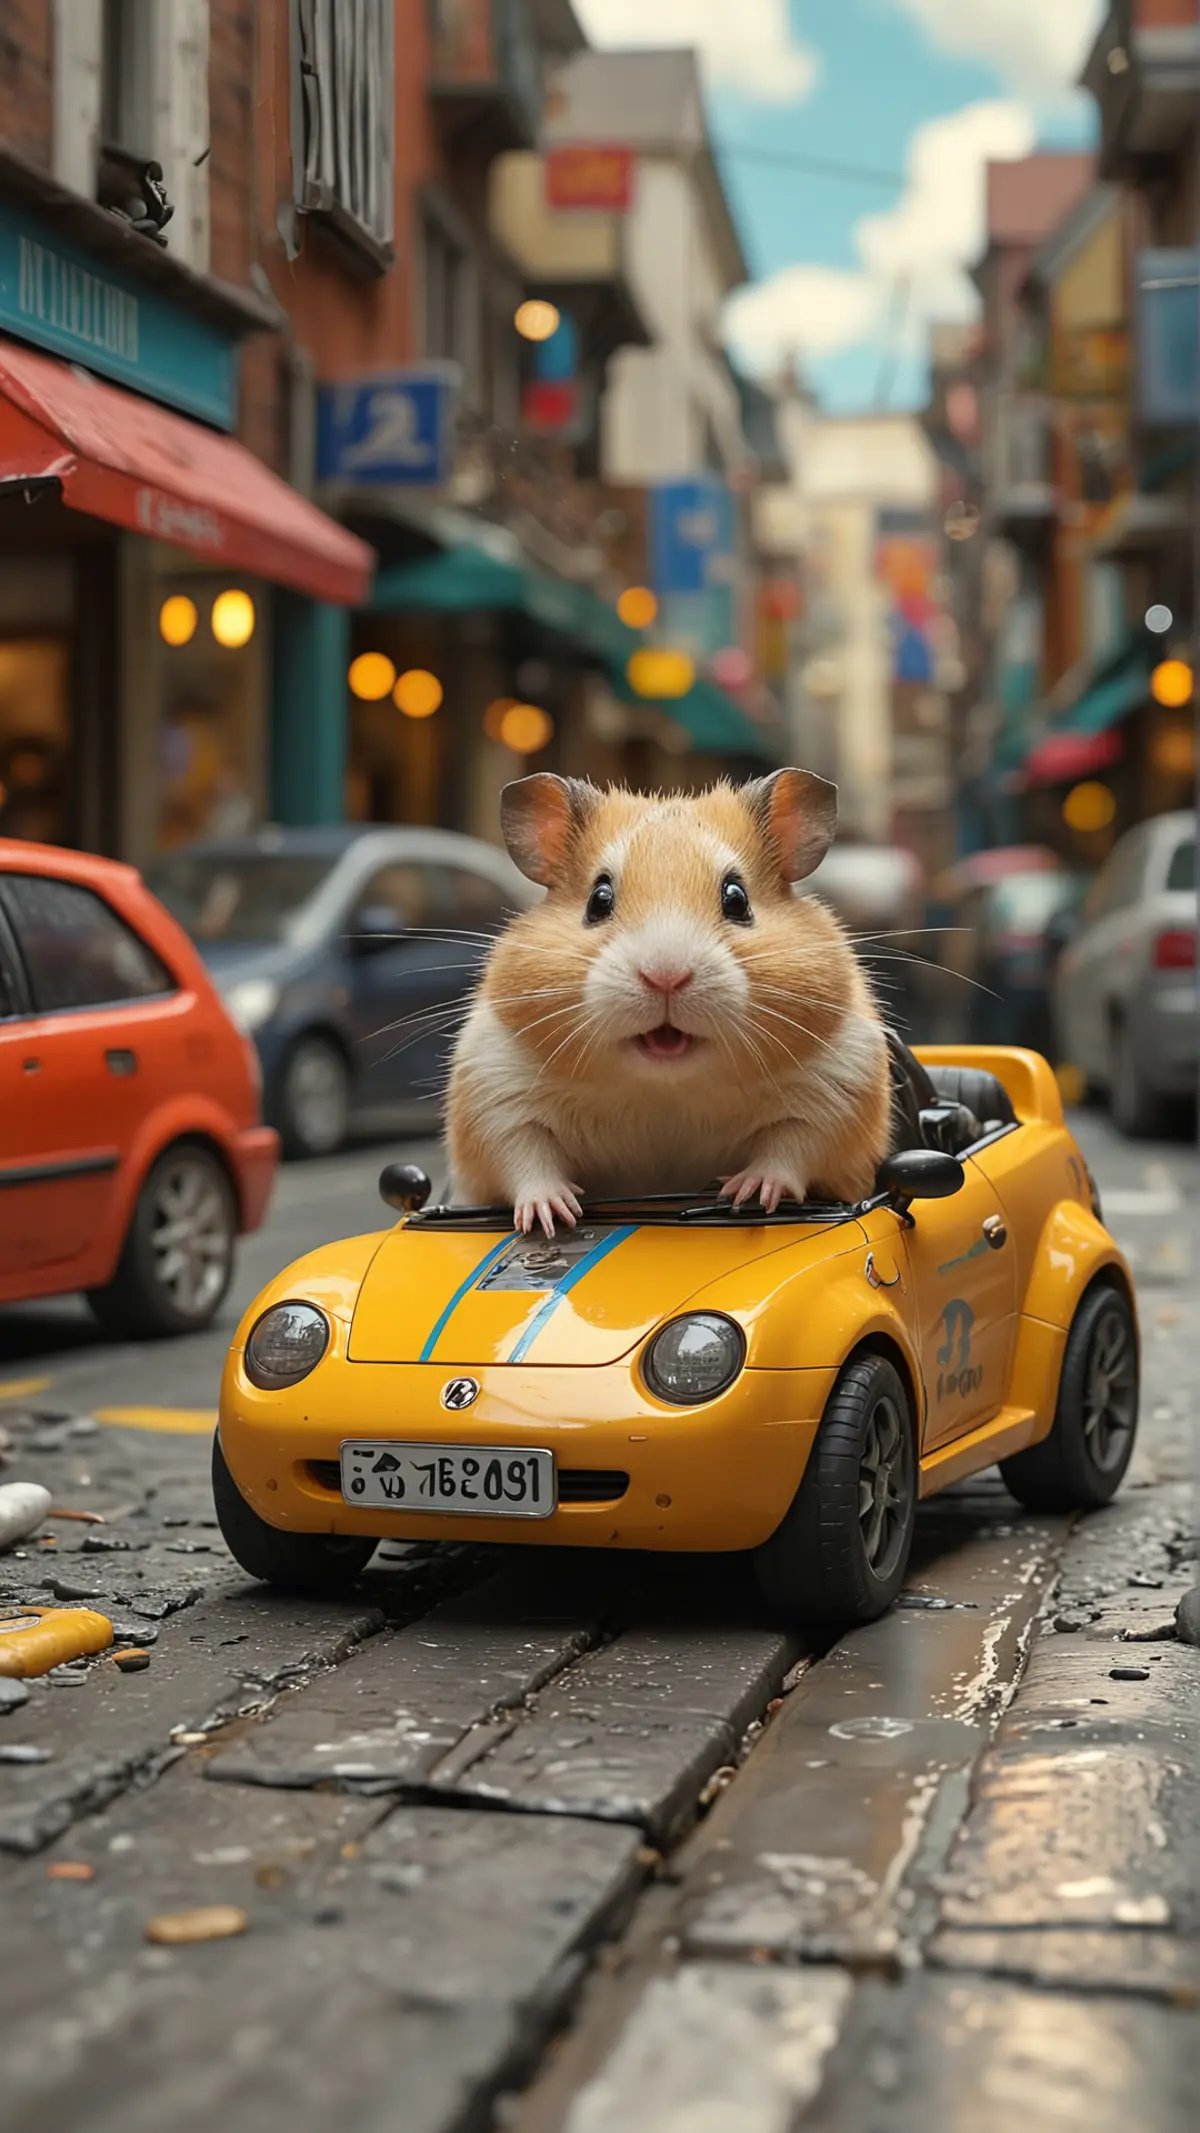 A hamster driving a miniature yellow convertible car down a tiny city street lined with various storefronts and signs. 